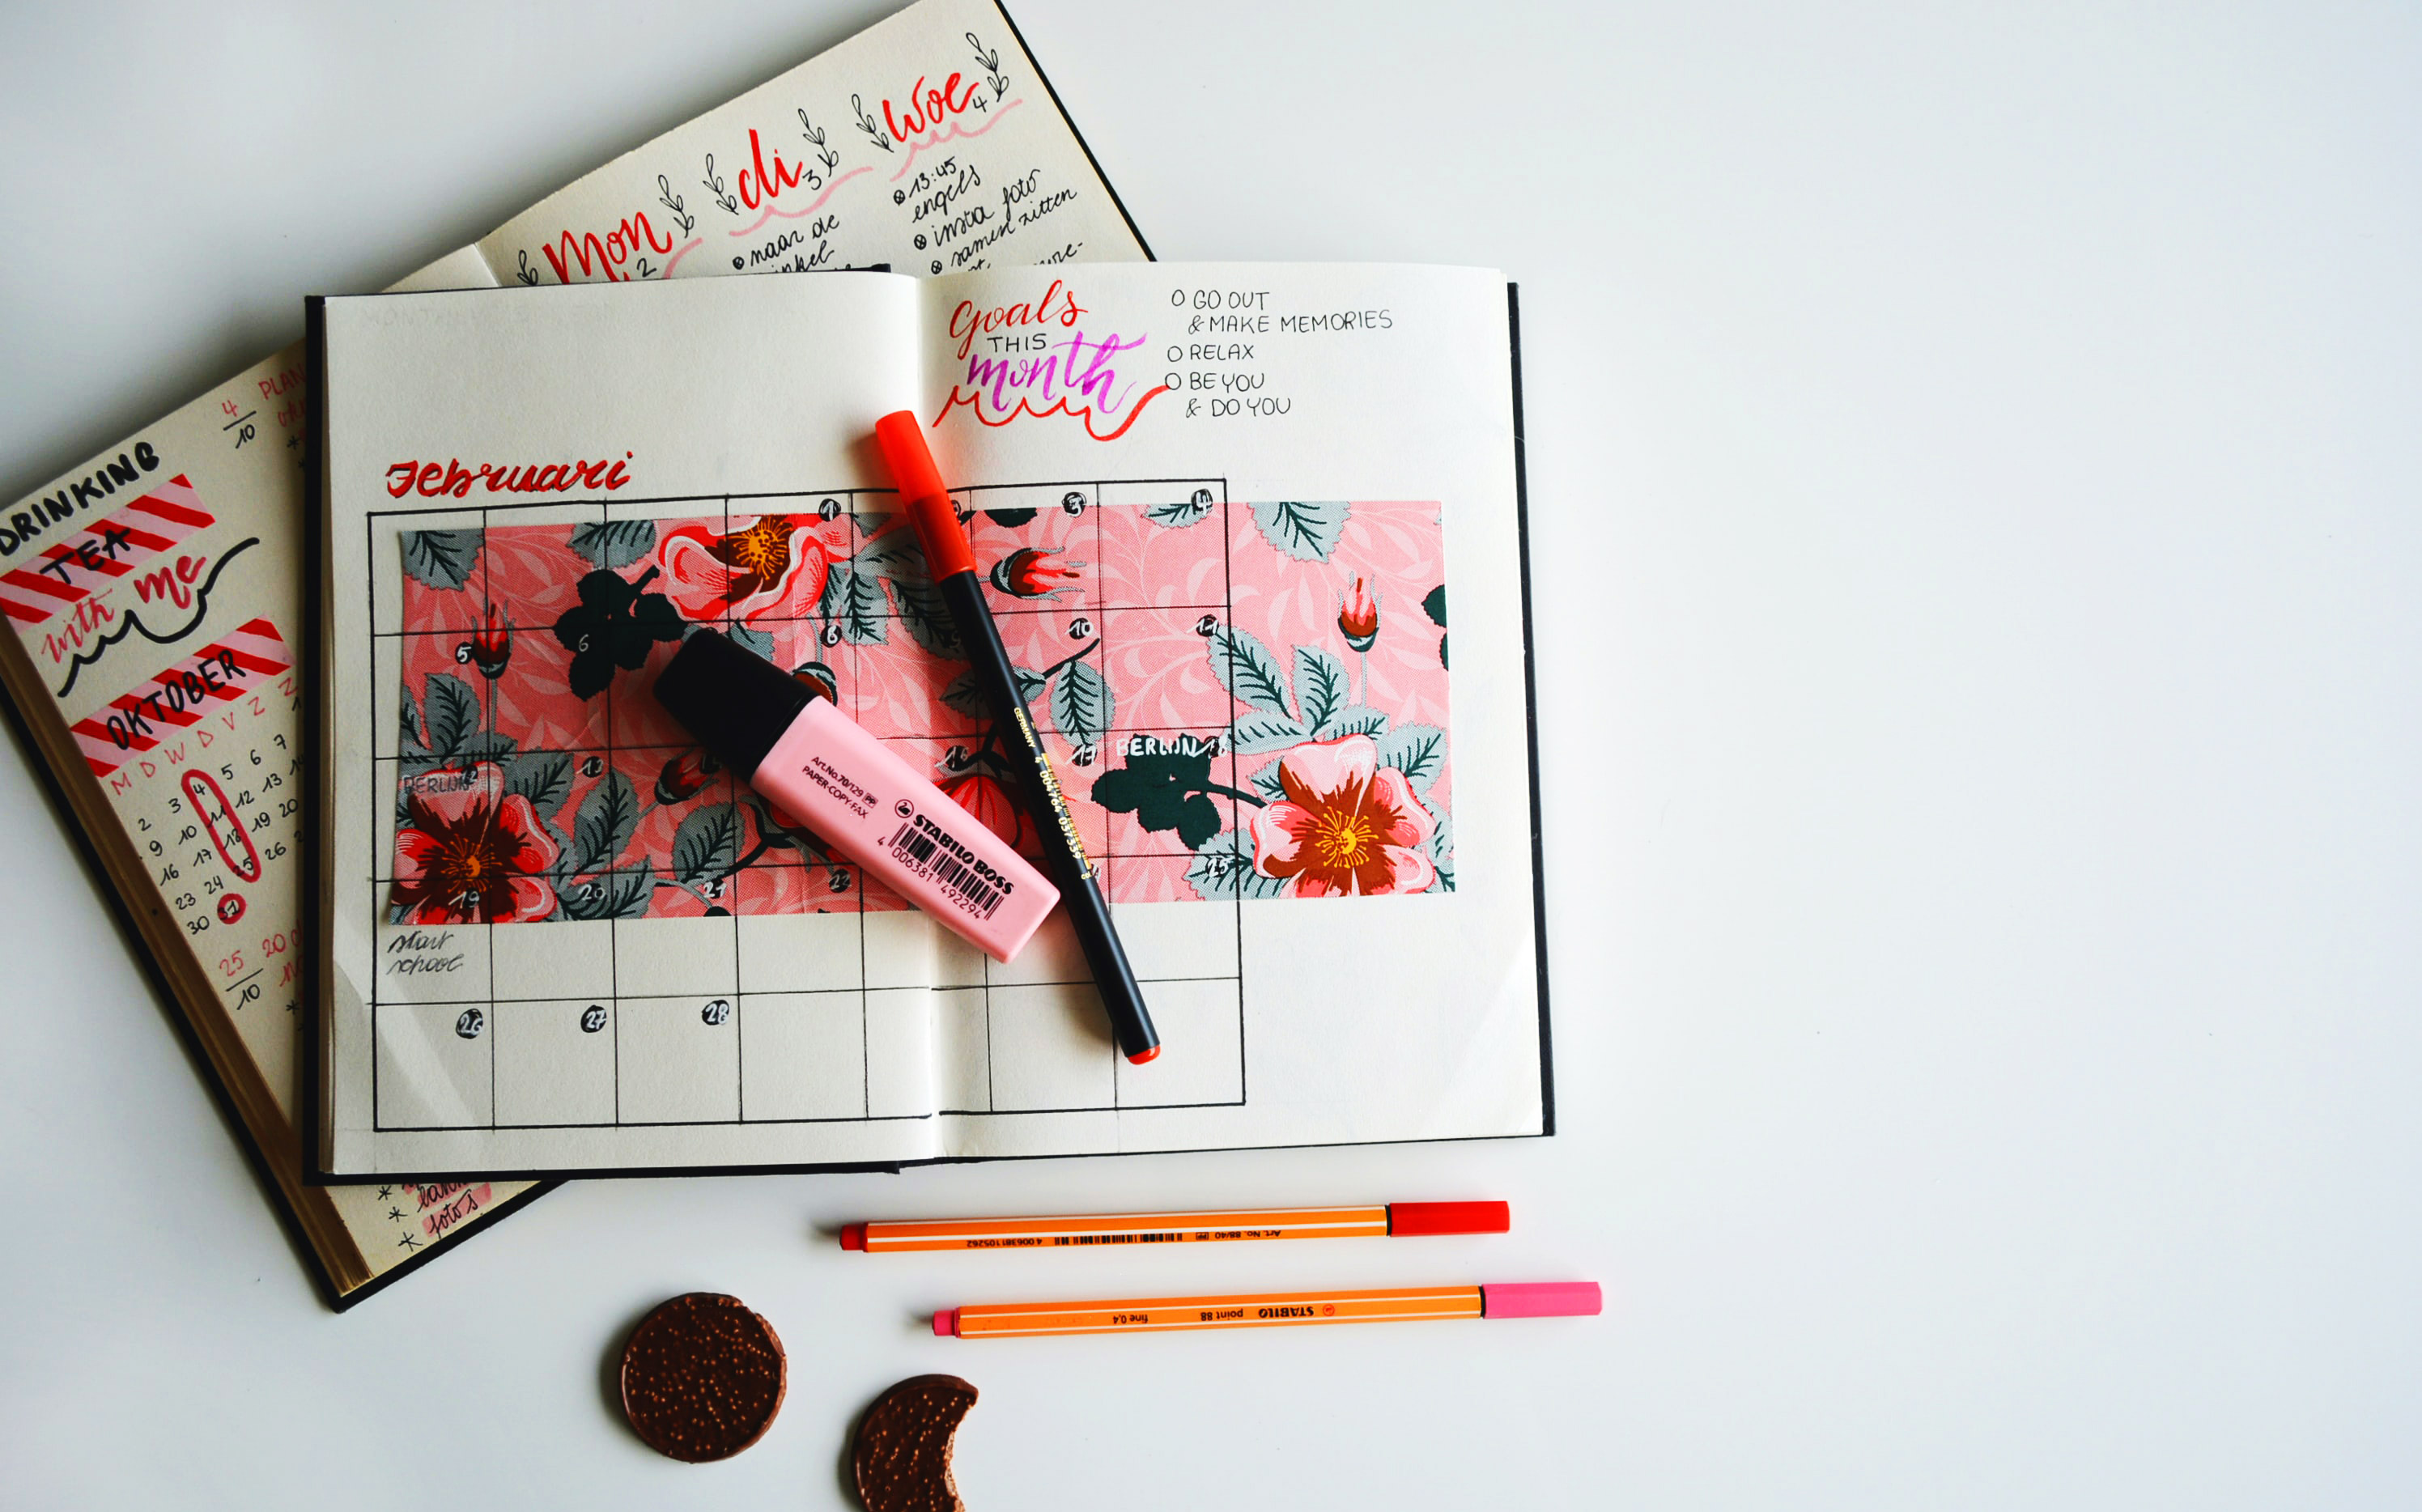 Bullet Journaling – How to get started